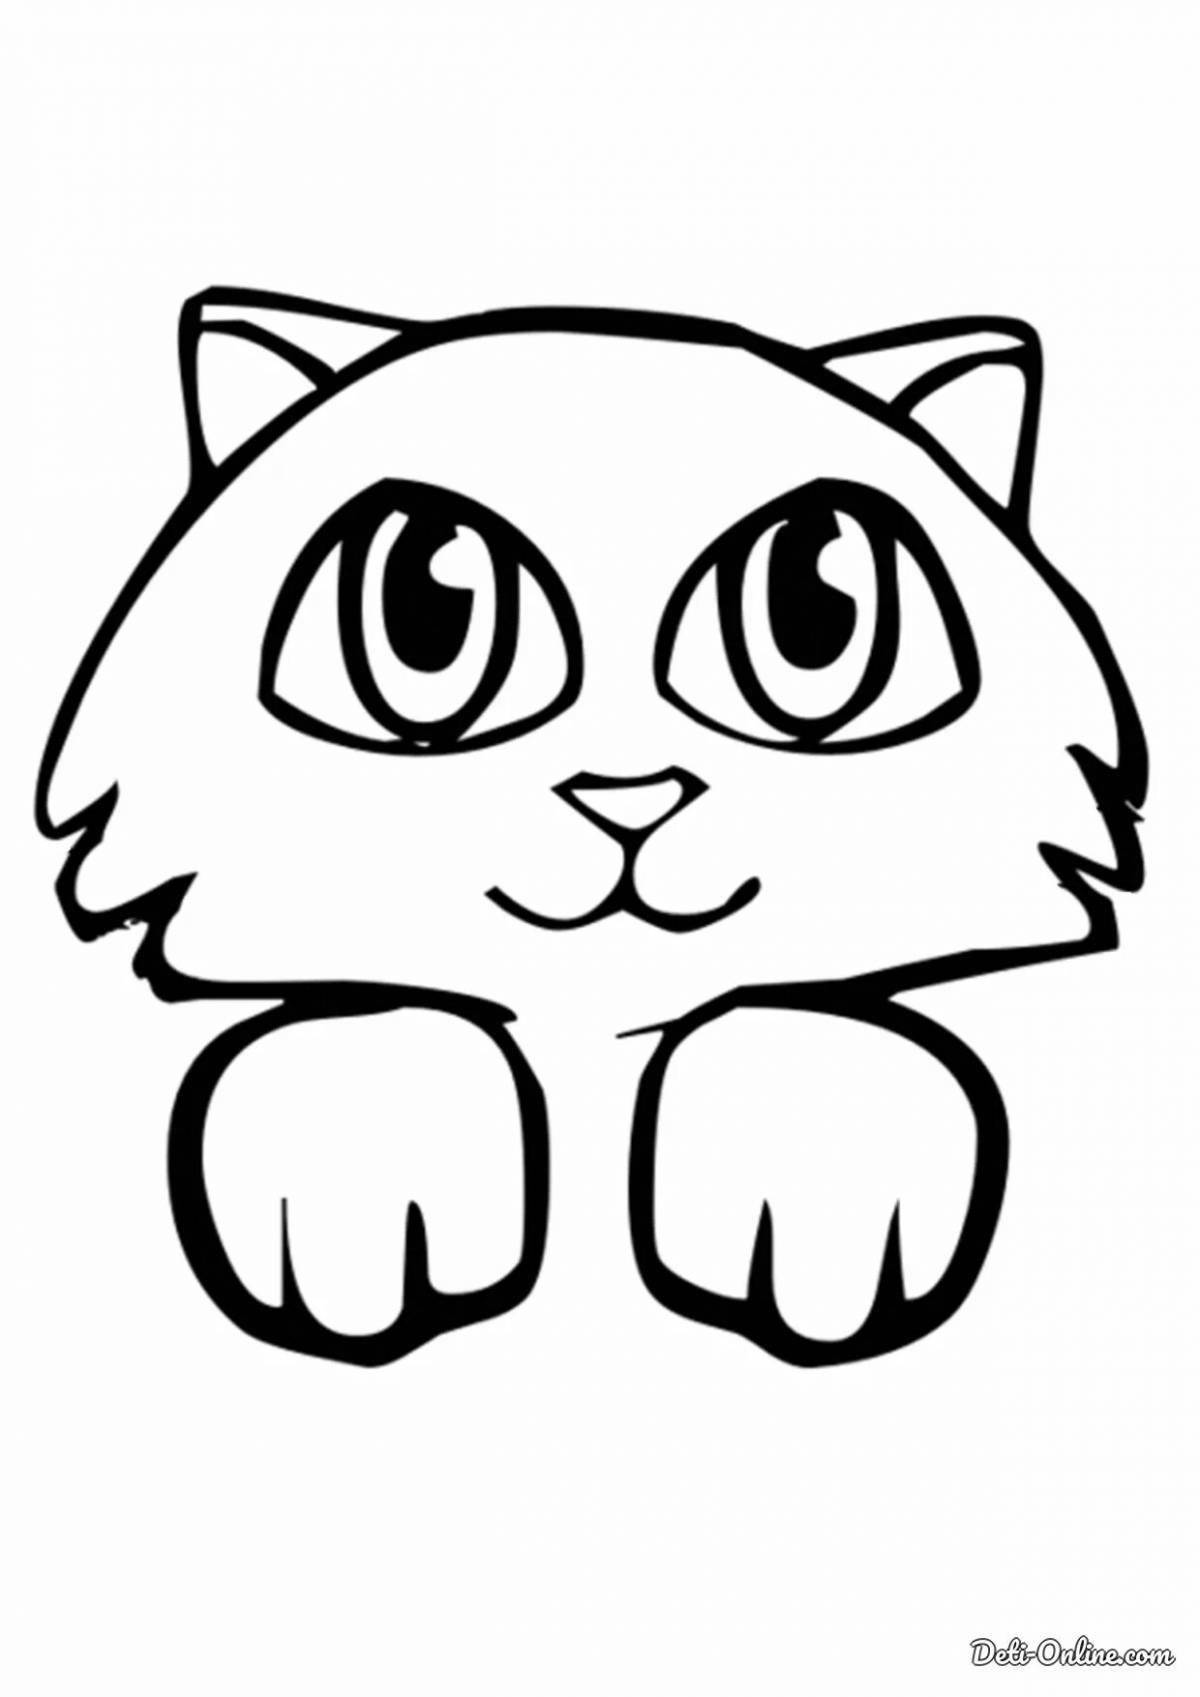 Furry cat coloring page